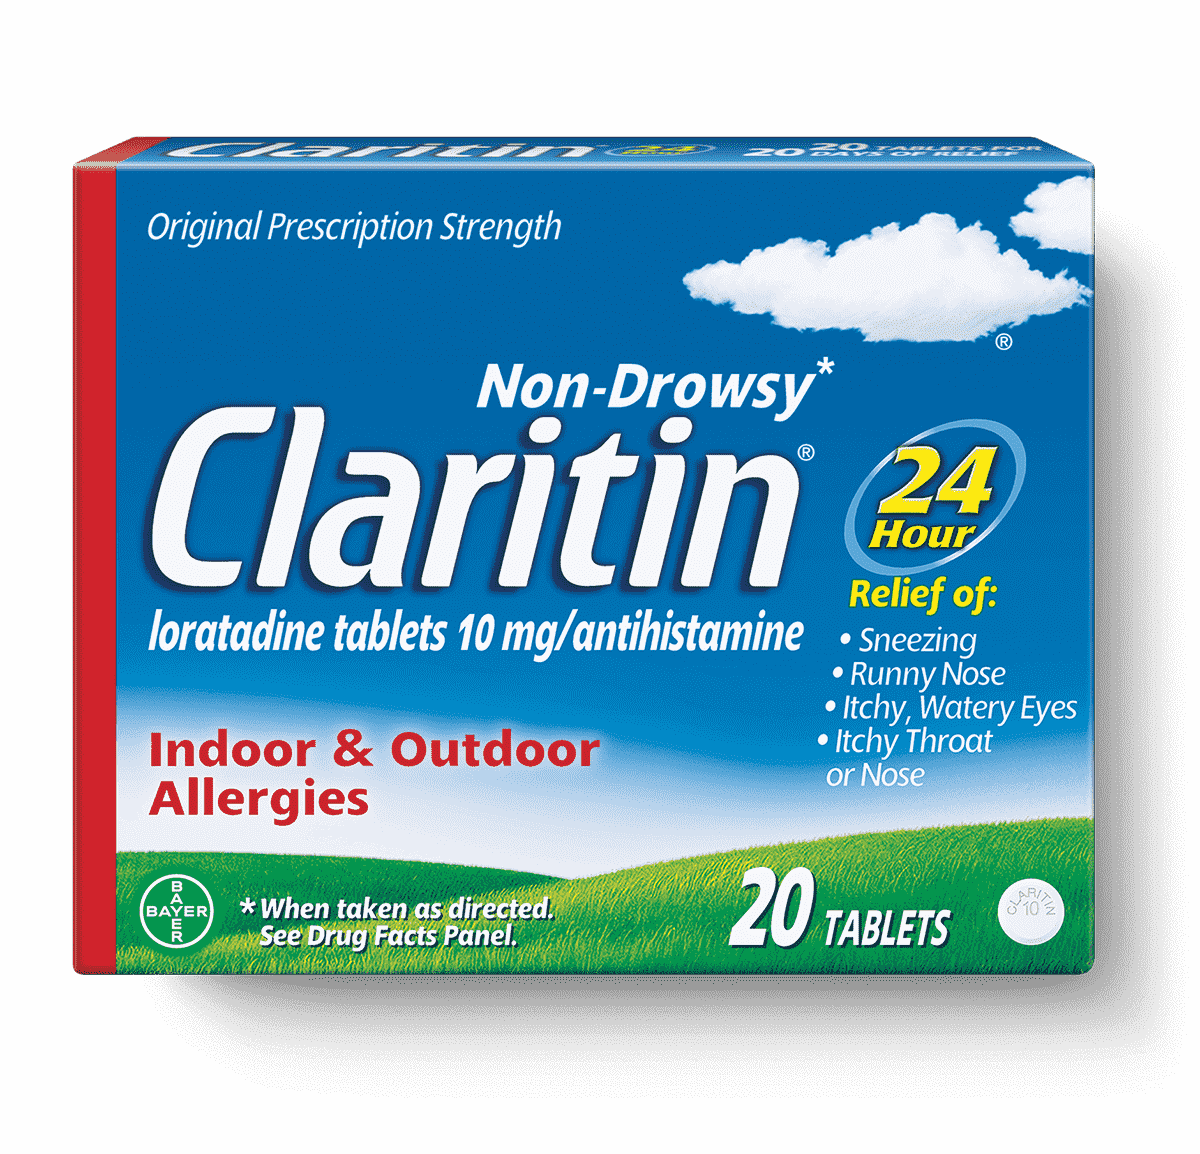 Claritin® Tablets 24-Hour - Relieve Allergy Symptoms